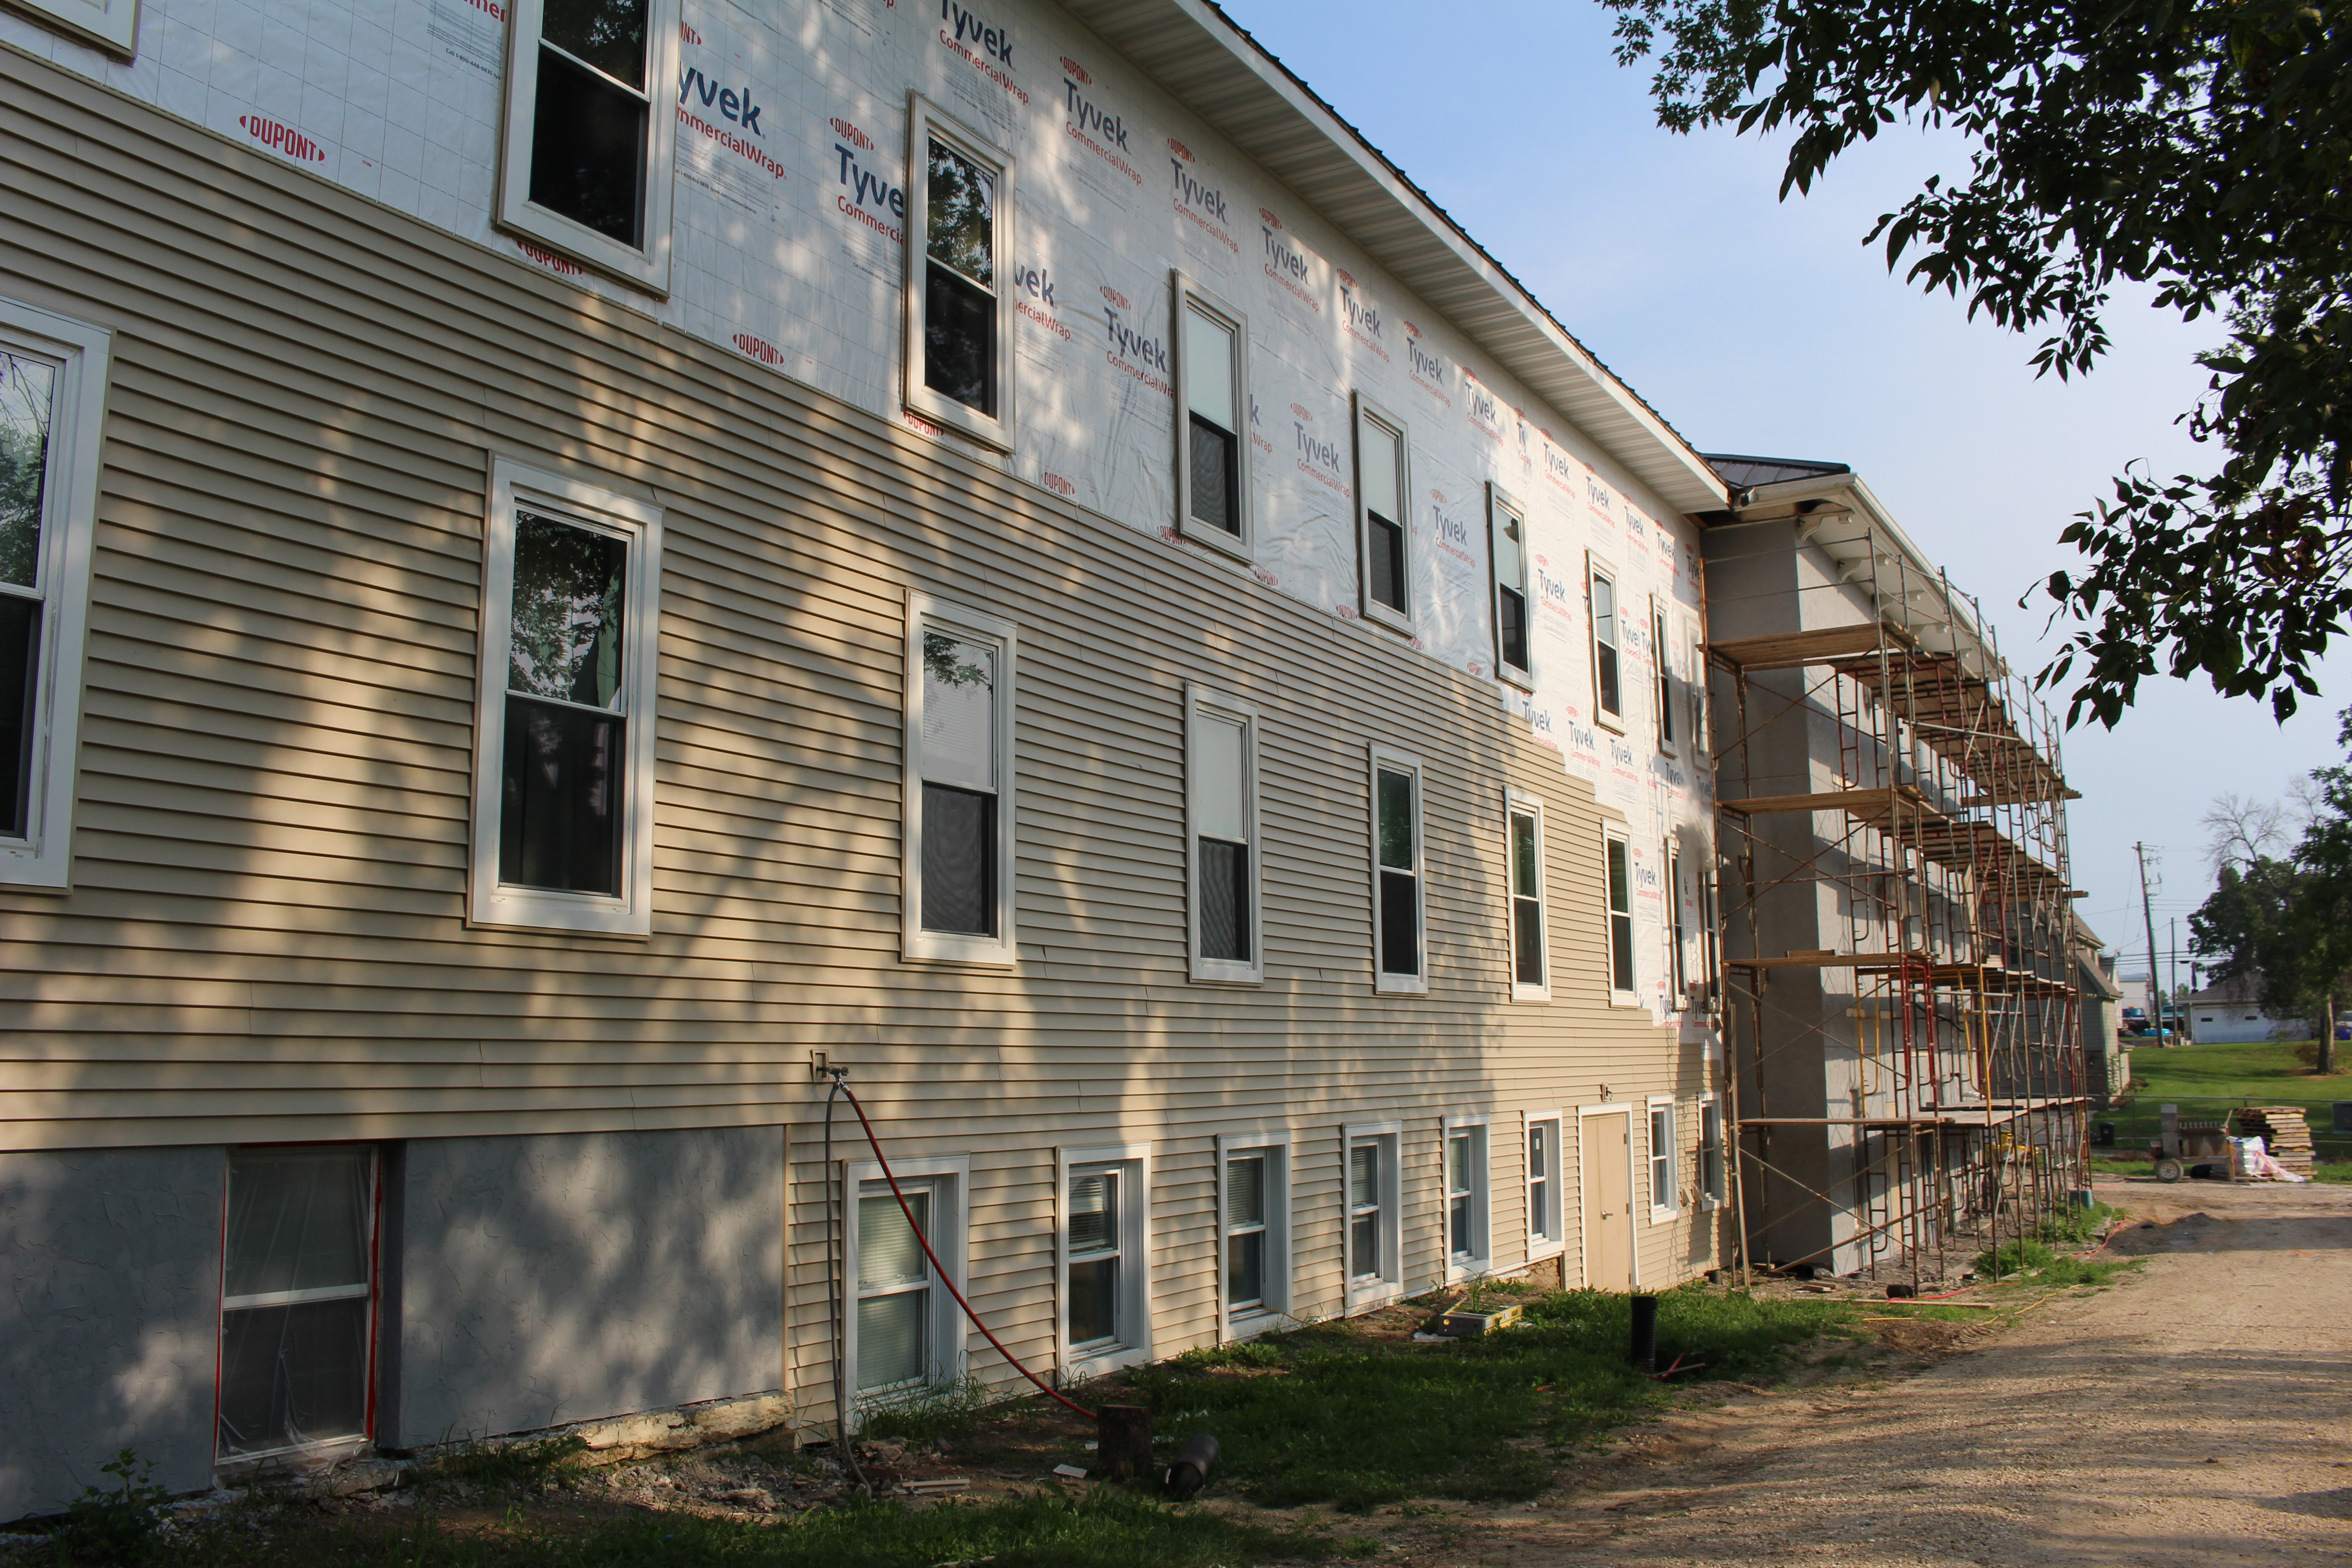 Building with partially installed siding and scaffolding